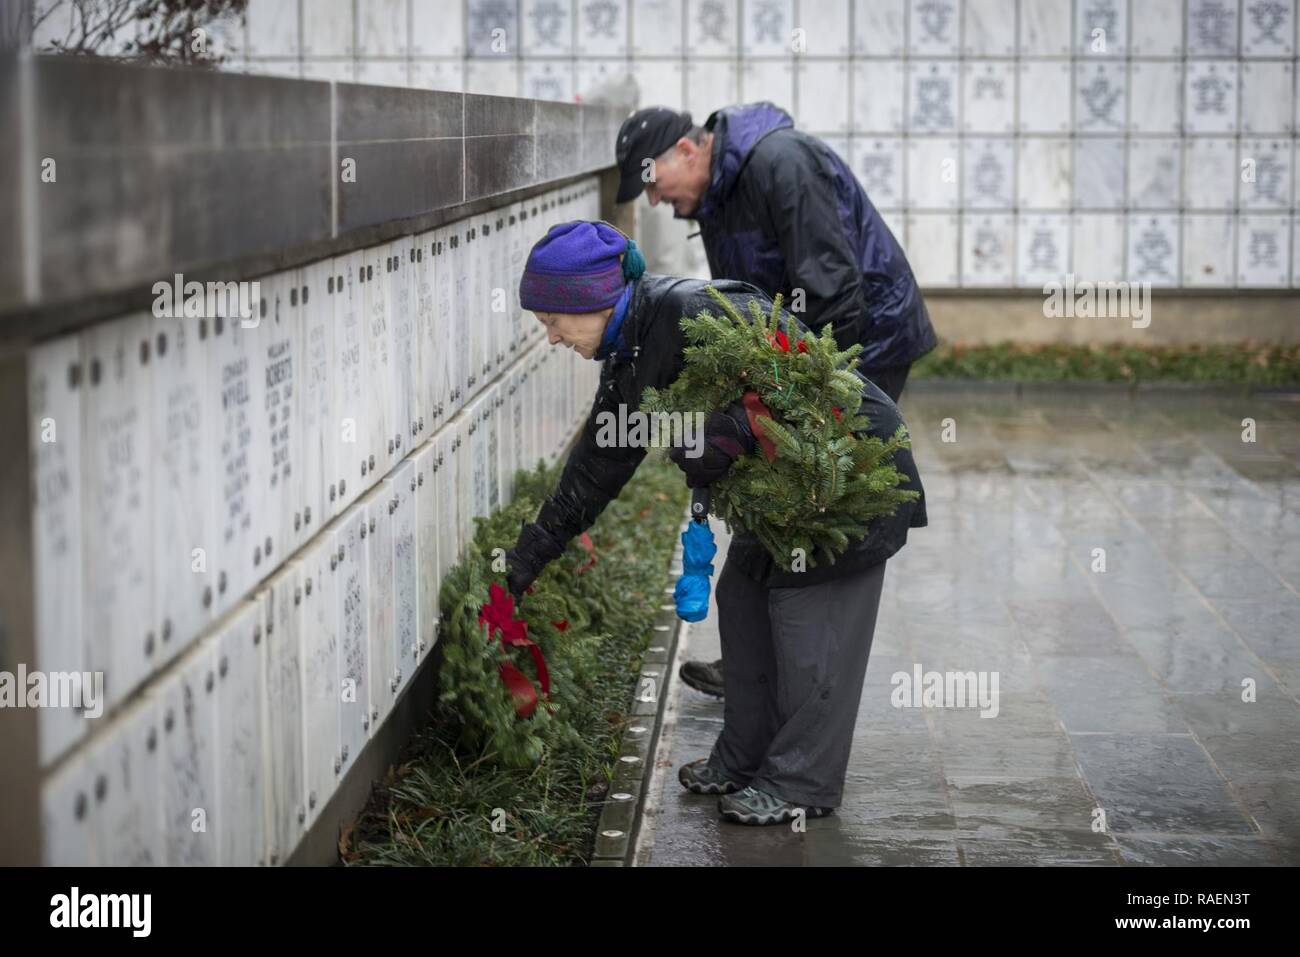 Volunteers lay wreaths in Columbarium Court 6 during the 27th National Wreaths Across America Day at Arlington National Cemetery, Arlington, Virginia, Dec. 15, 2018. On this day, thousands of volunteers place wreaths at every gravesite at Arlington National Cemetery. Stock Photo